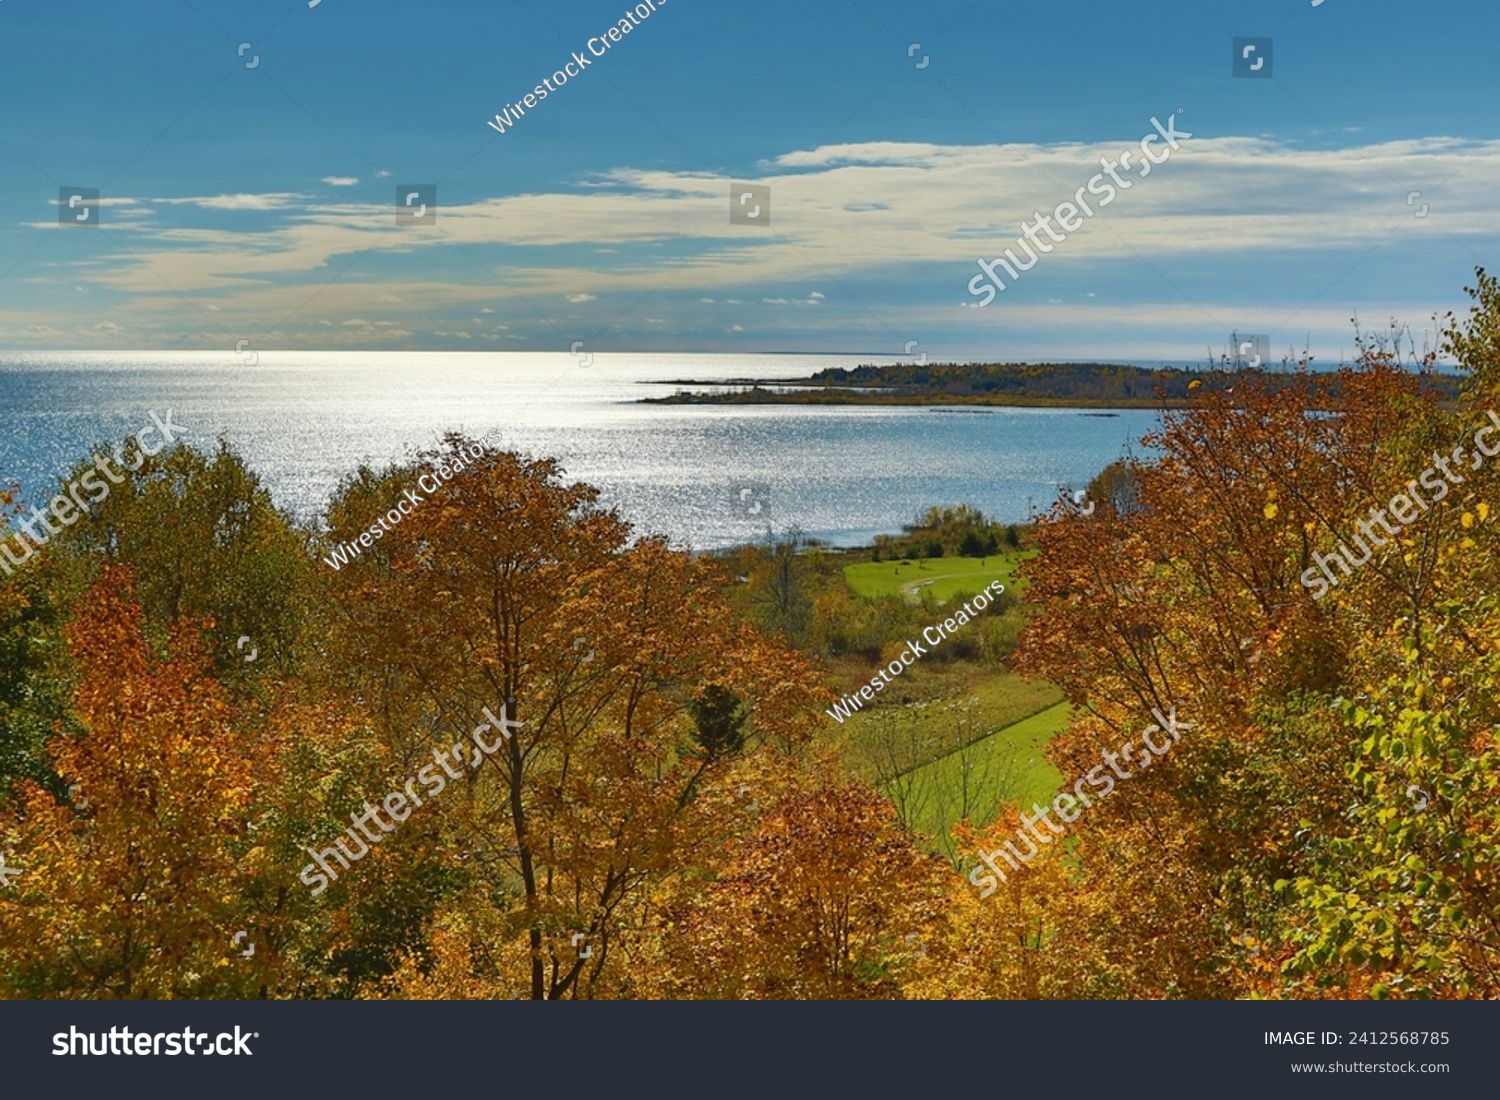 A picturesque scenery of a calm sea and blue sky captured from a shore with autums trees #2412568785